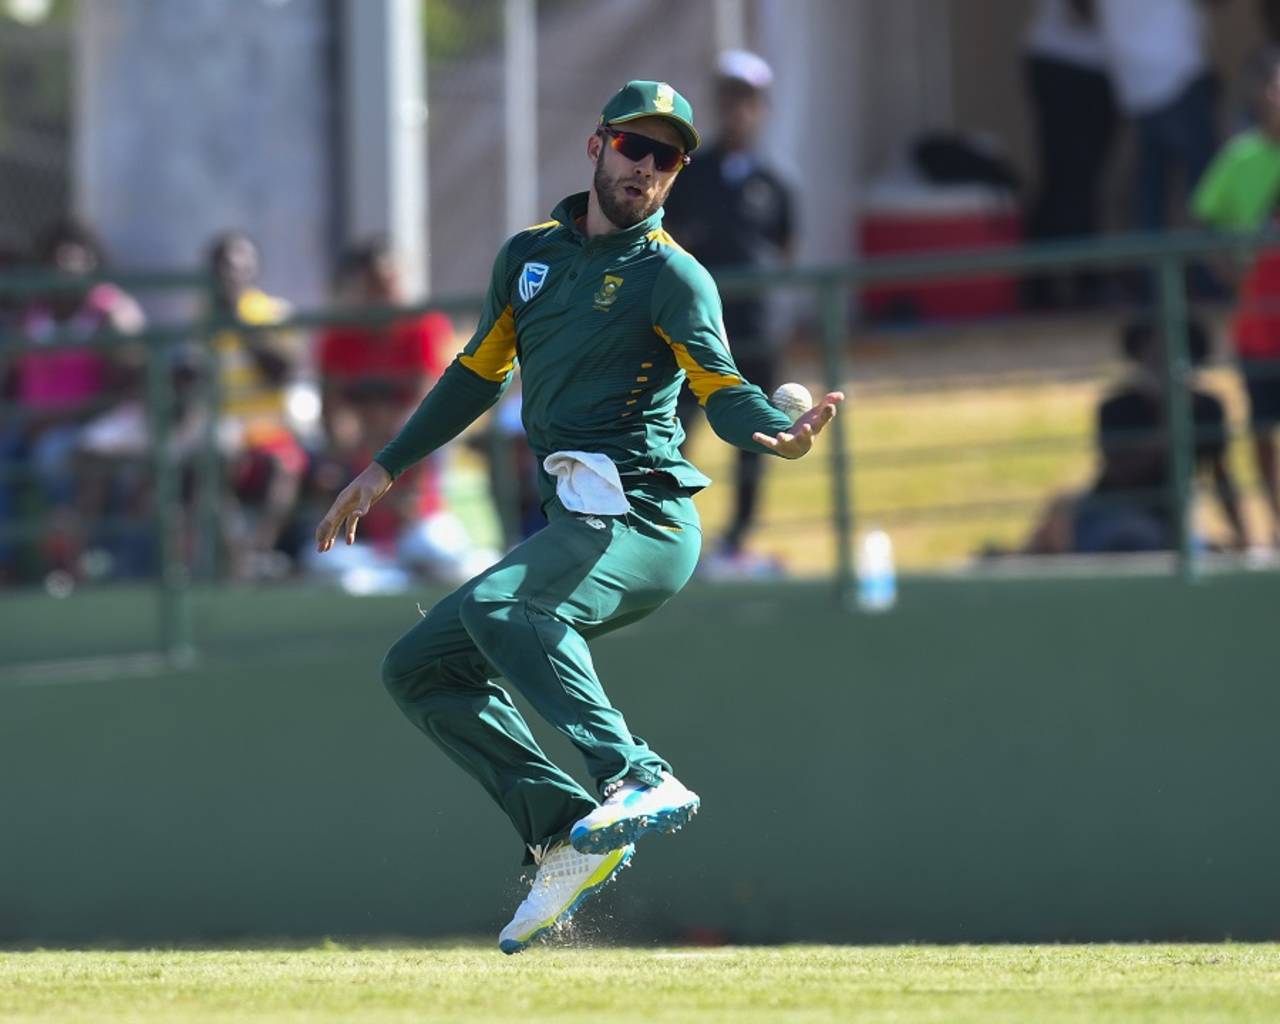 Russell Domingo has expressed concerns over the workloads of several South African players, including AB de Villiers, who play international cricket and various leagues&nbsp;&nbsp;&bull;&nbsp;&nbsp;WICB